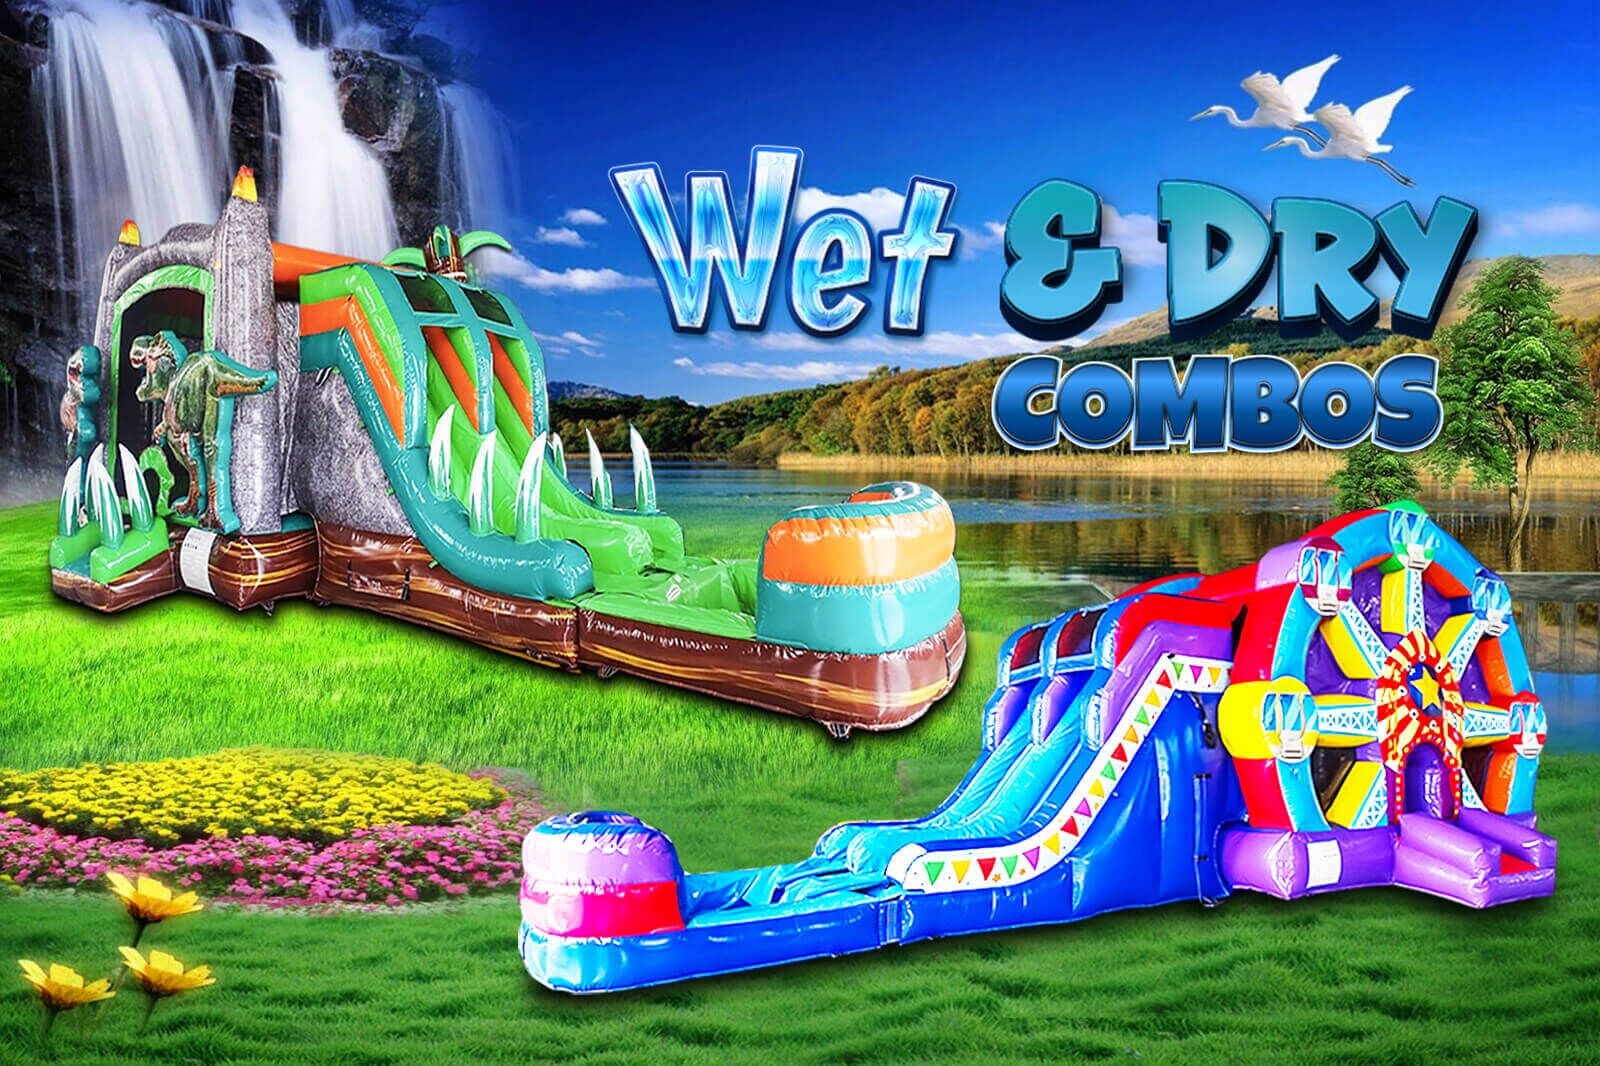 Bounce Wave Wet Dry Combos 2